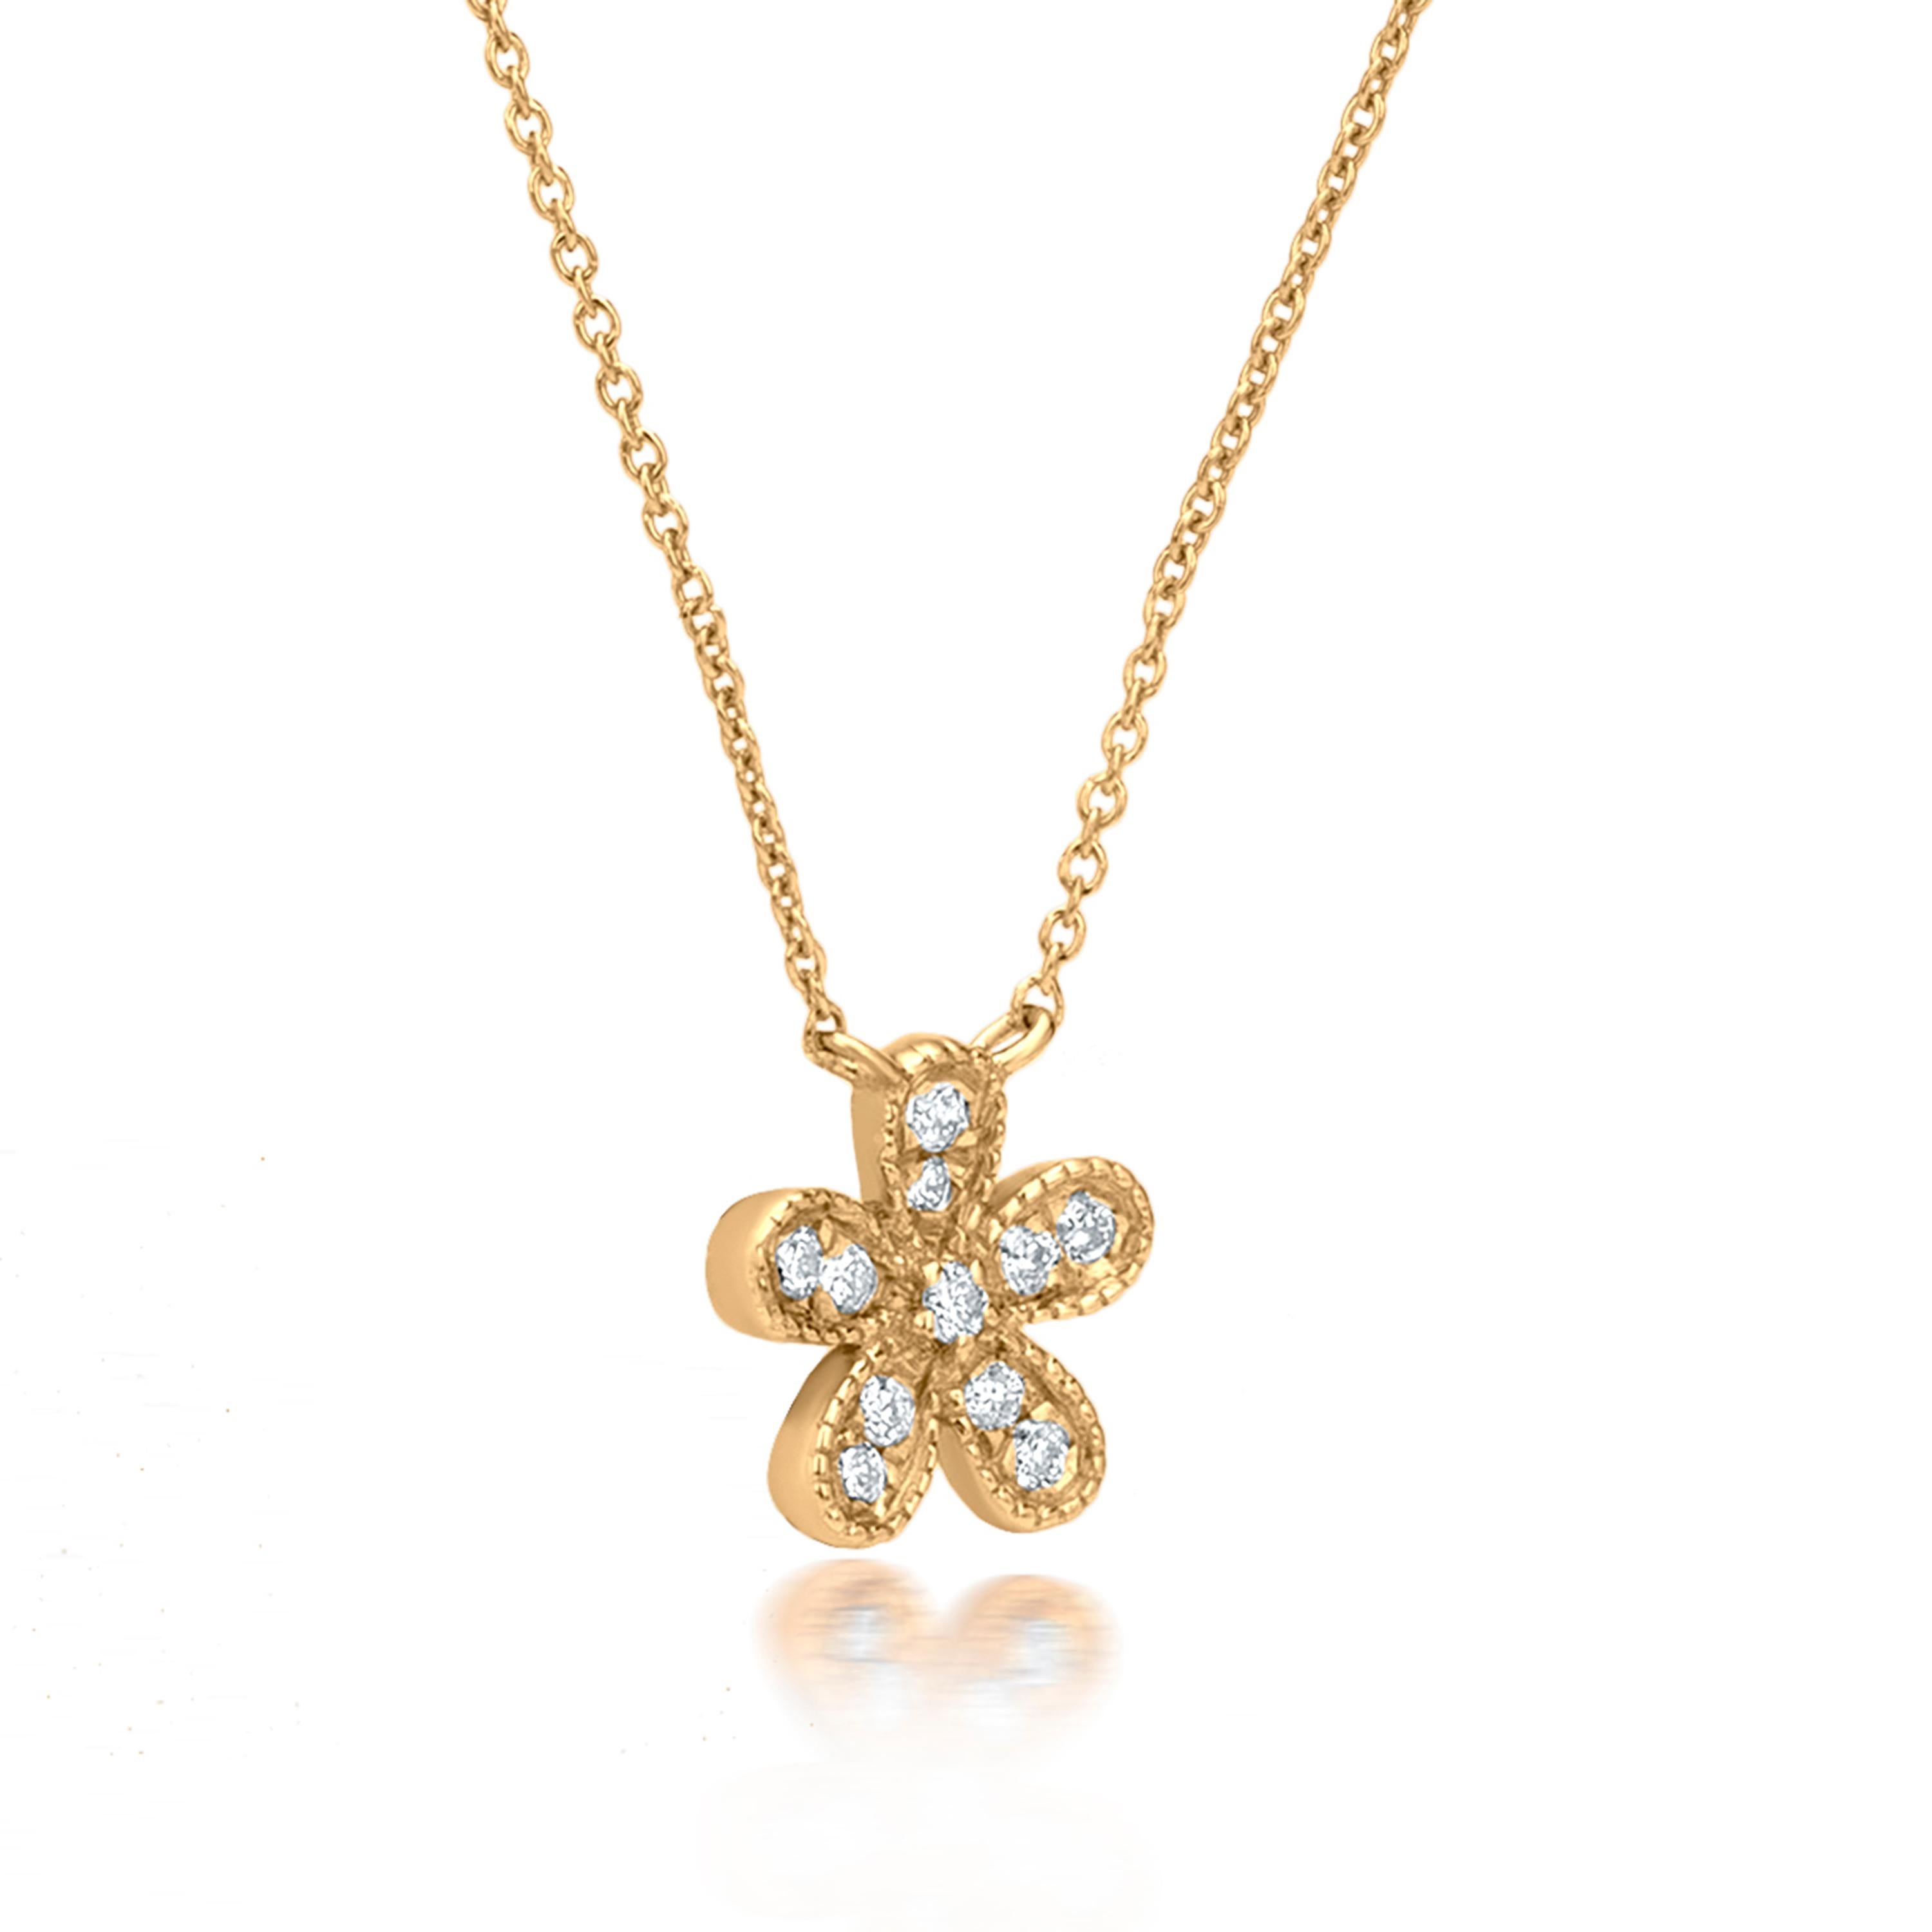 Round Cut Luxle Flower Diamond Pendant Necklace in 18K Yellow Gold